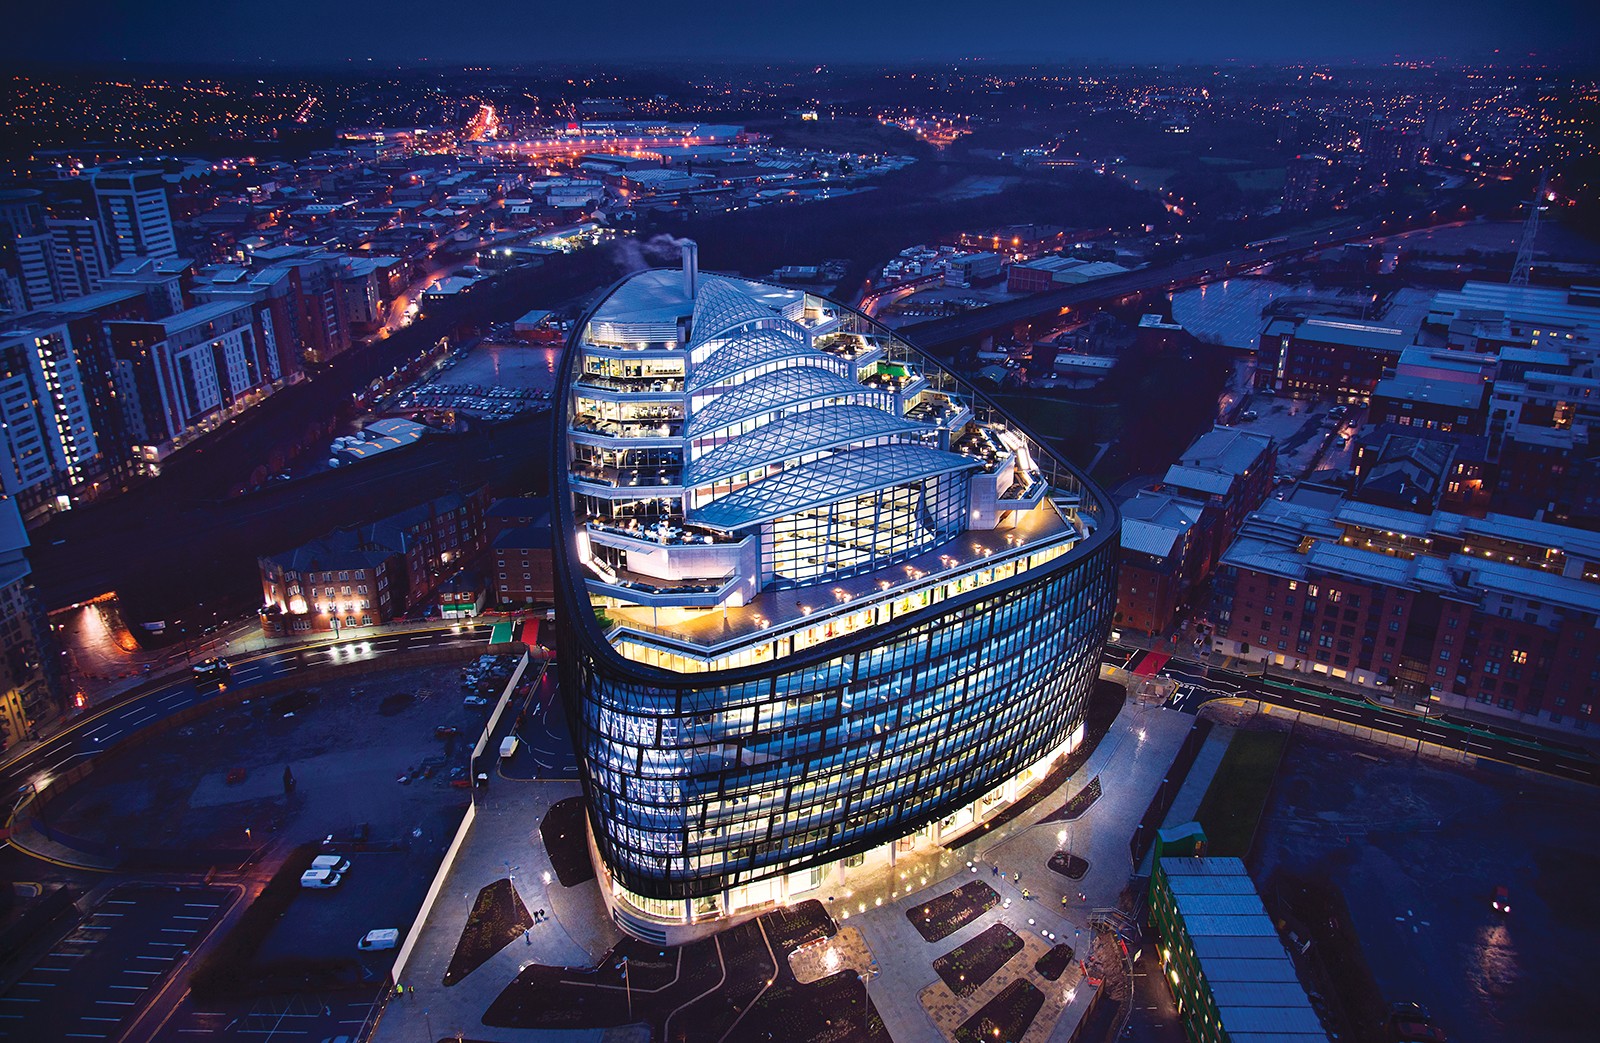 The Co-operative Group's headquarters in Angel Square, Manchester